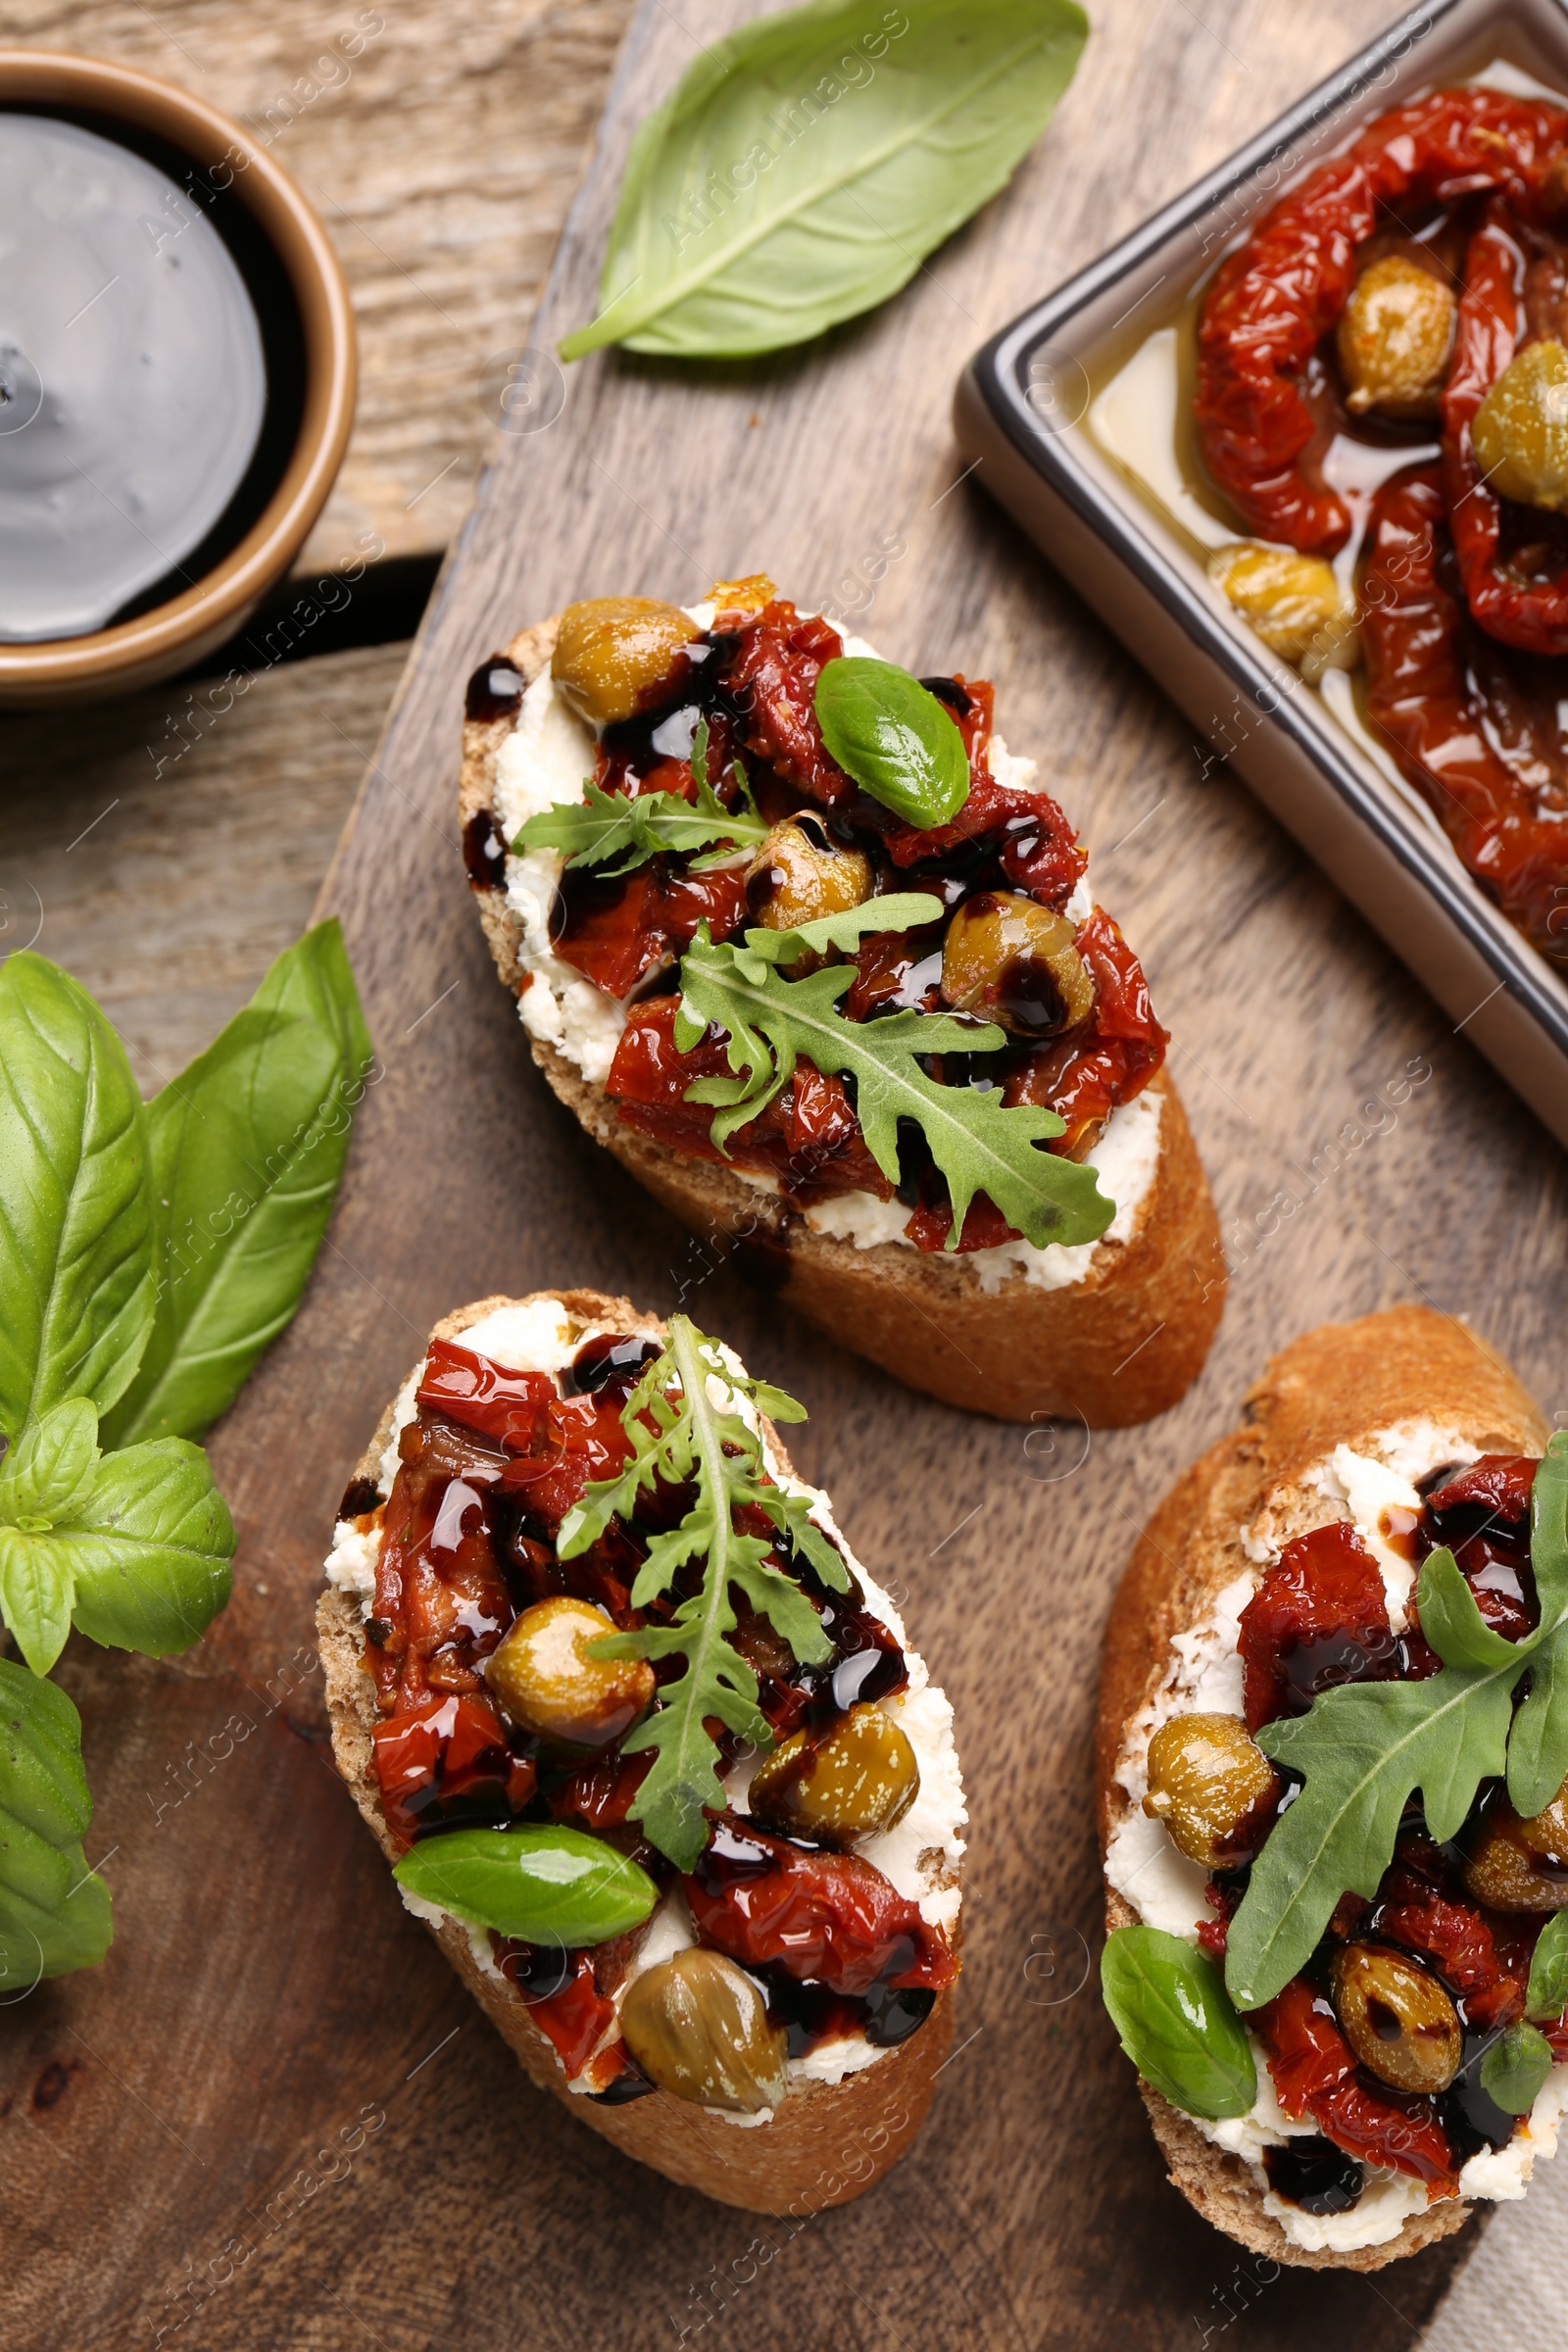 Photo of Delicious bruschettas with balsamic vinegar and toppings served on wooden table, flat lay